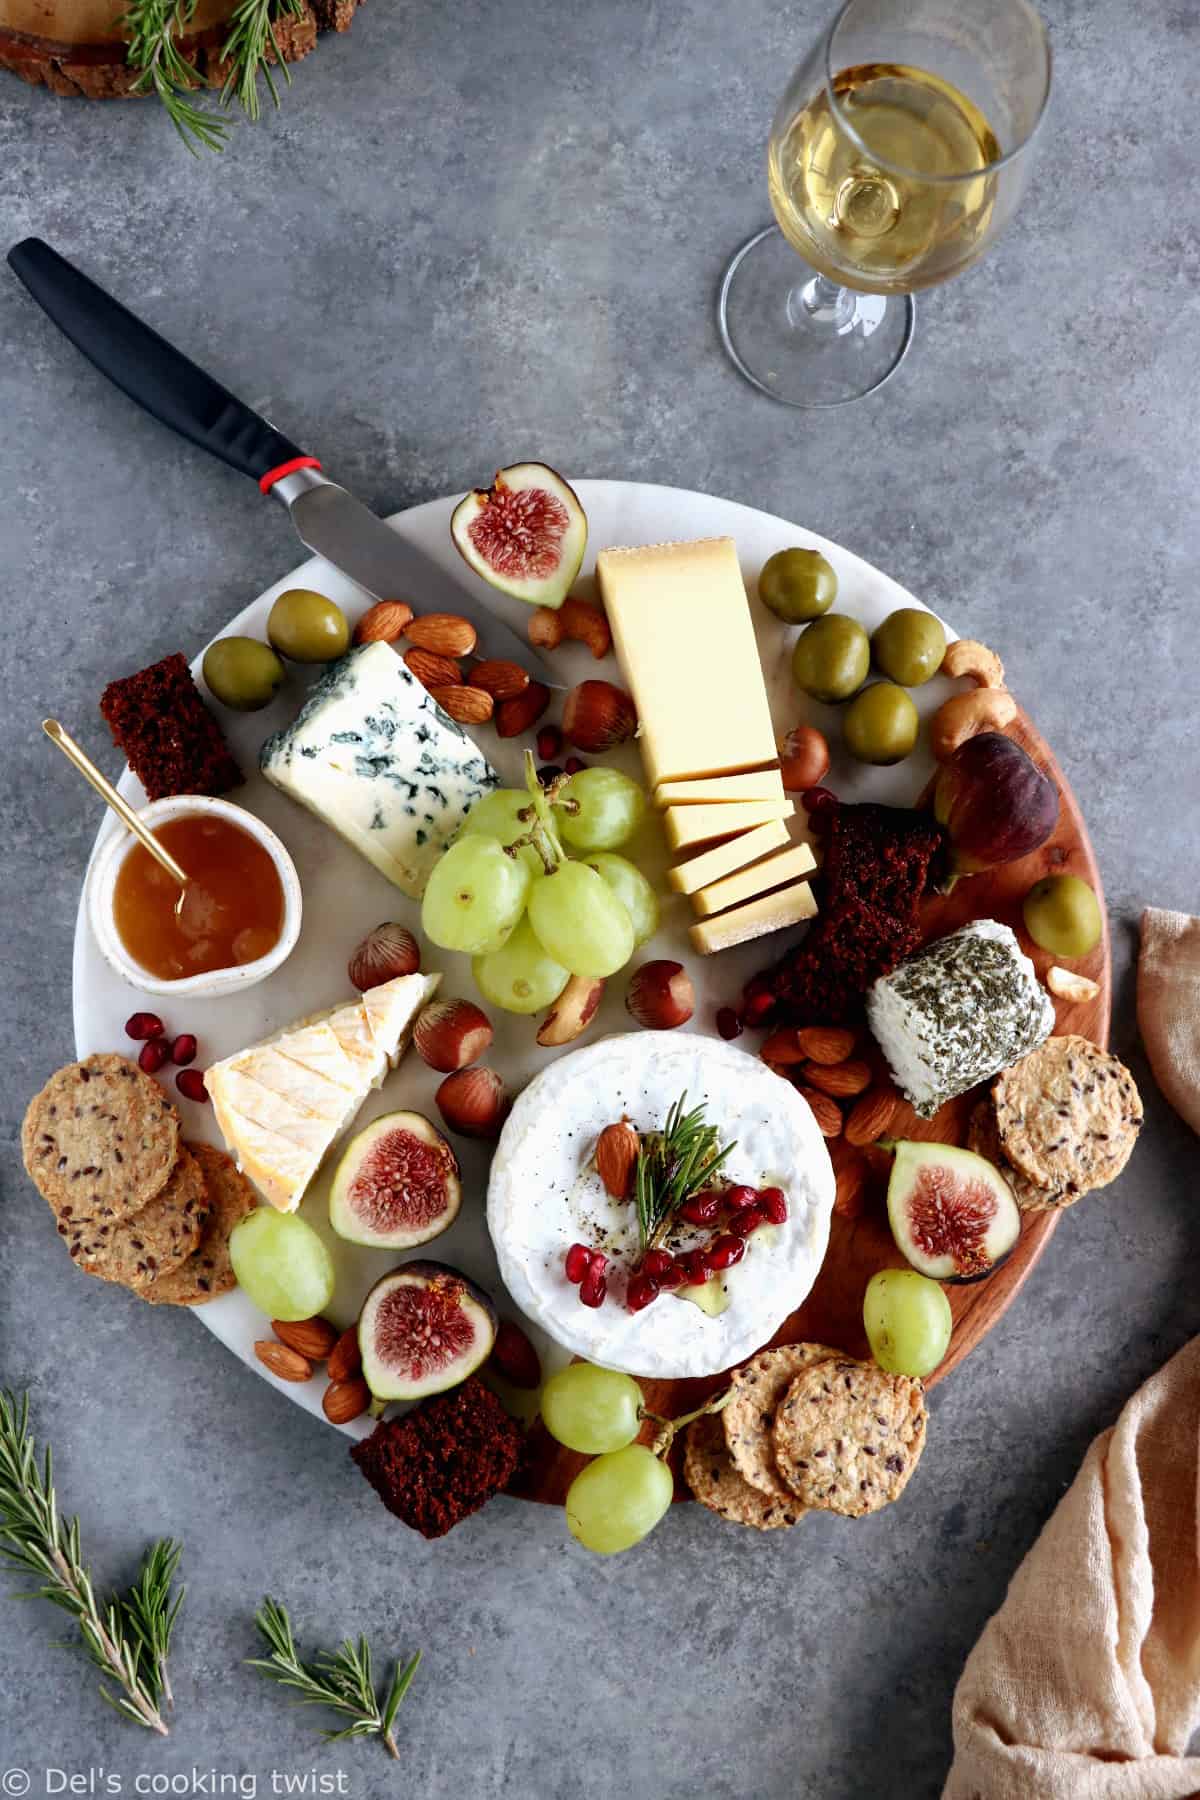 How to Make a Cheese Plate (with step-by-step photos!)